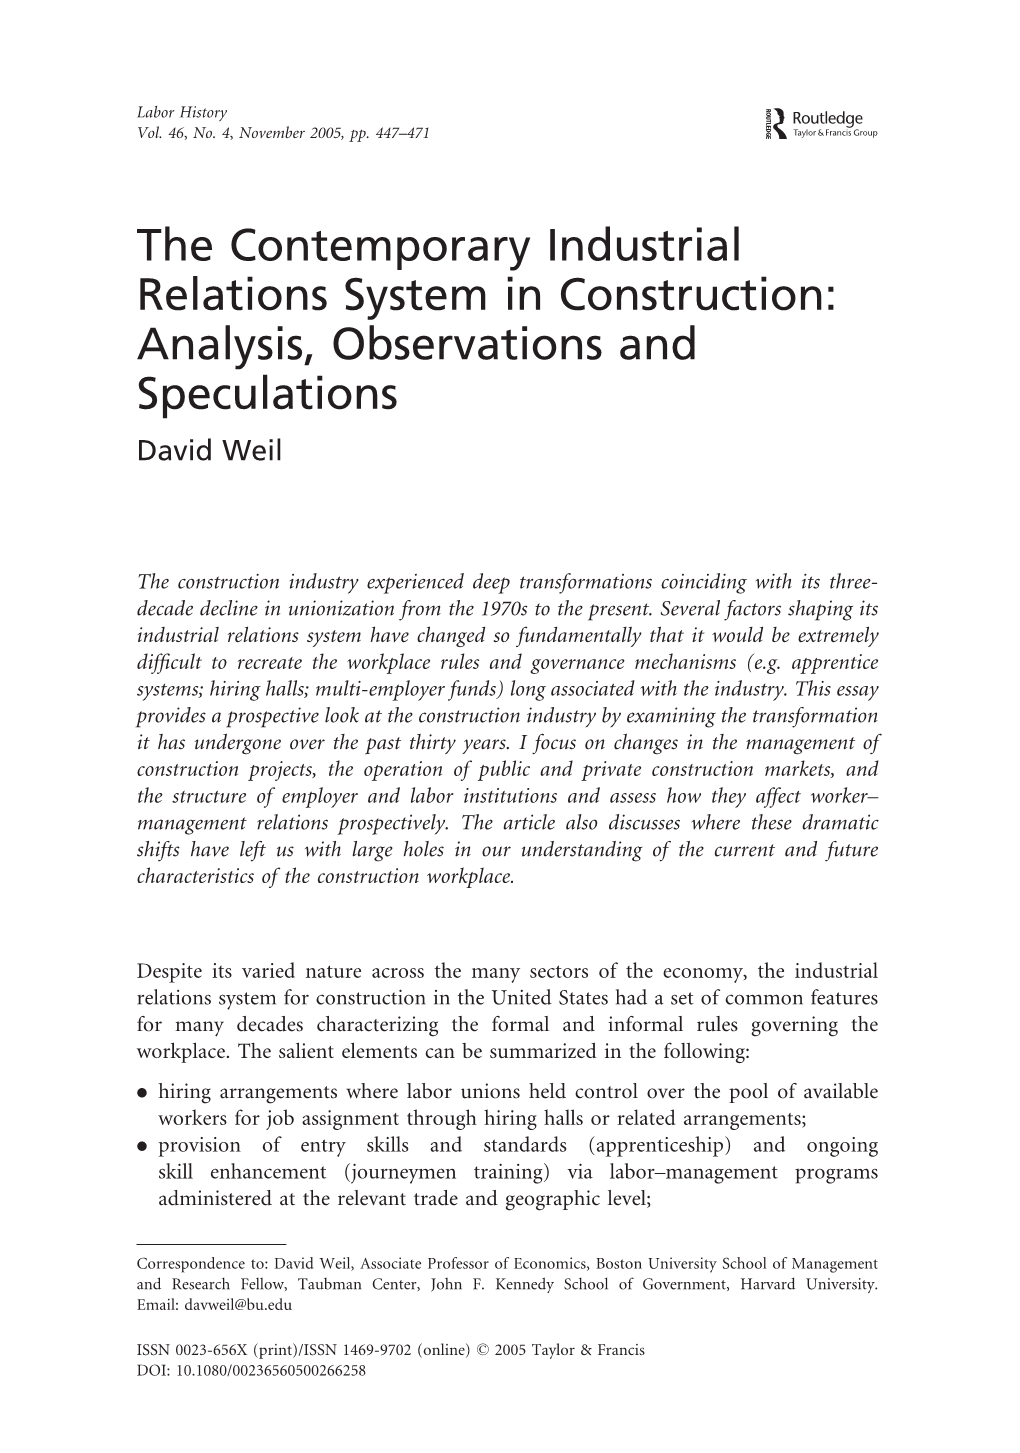 The Contemporary Industrial Relations System in Construction: Analysis, Observations and Speculations David Weil